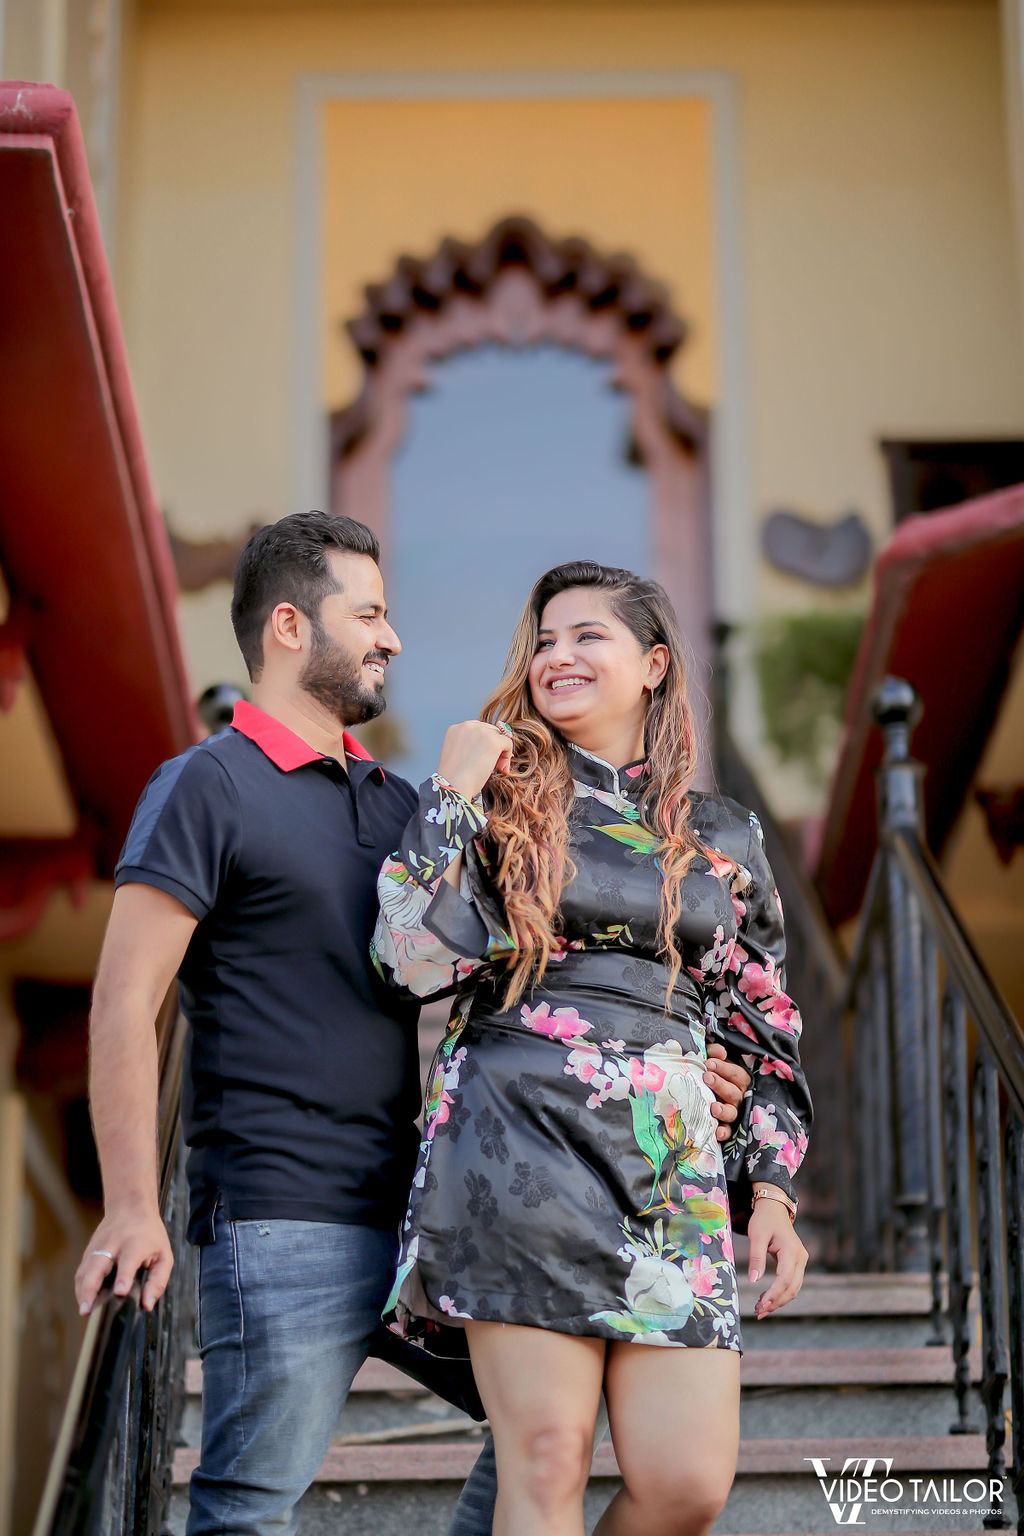 40+ Poses For Pre-Wedding Photoshoot For Camera-Shy Couples | Pre wedding  photoshoot outfit, Wedding photoshoot poses, Pre wedding photoshoot outdoor